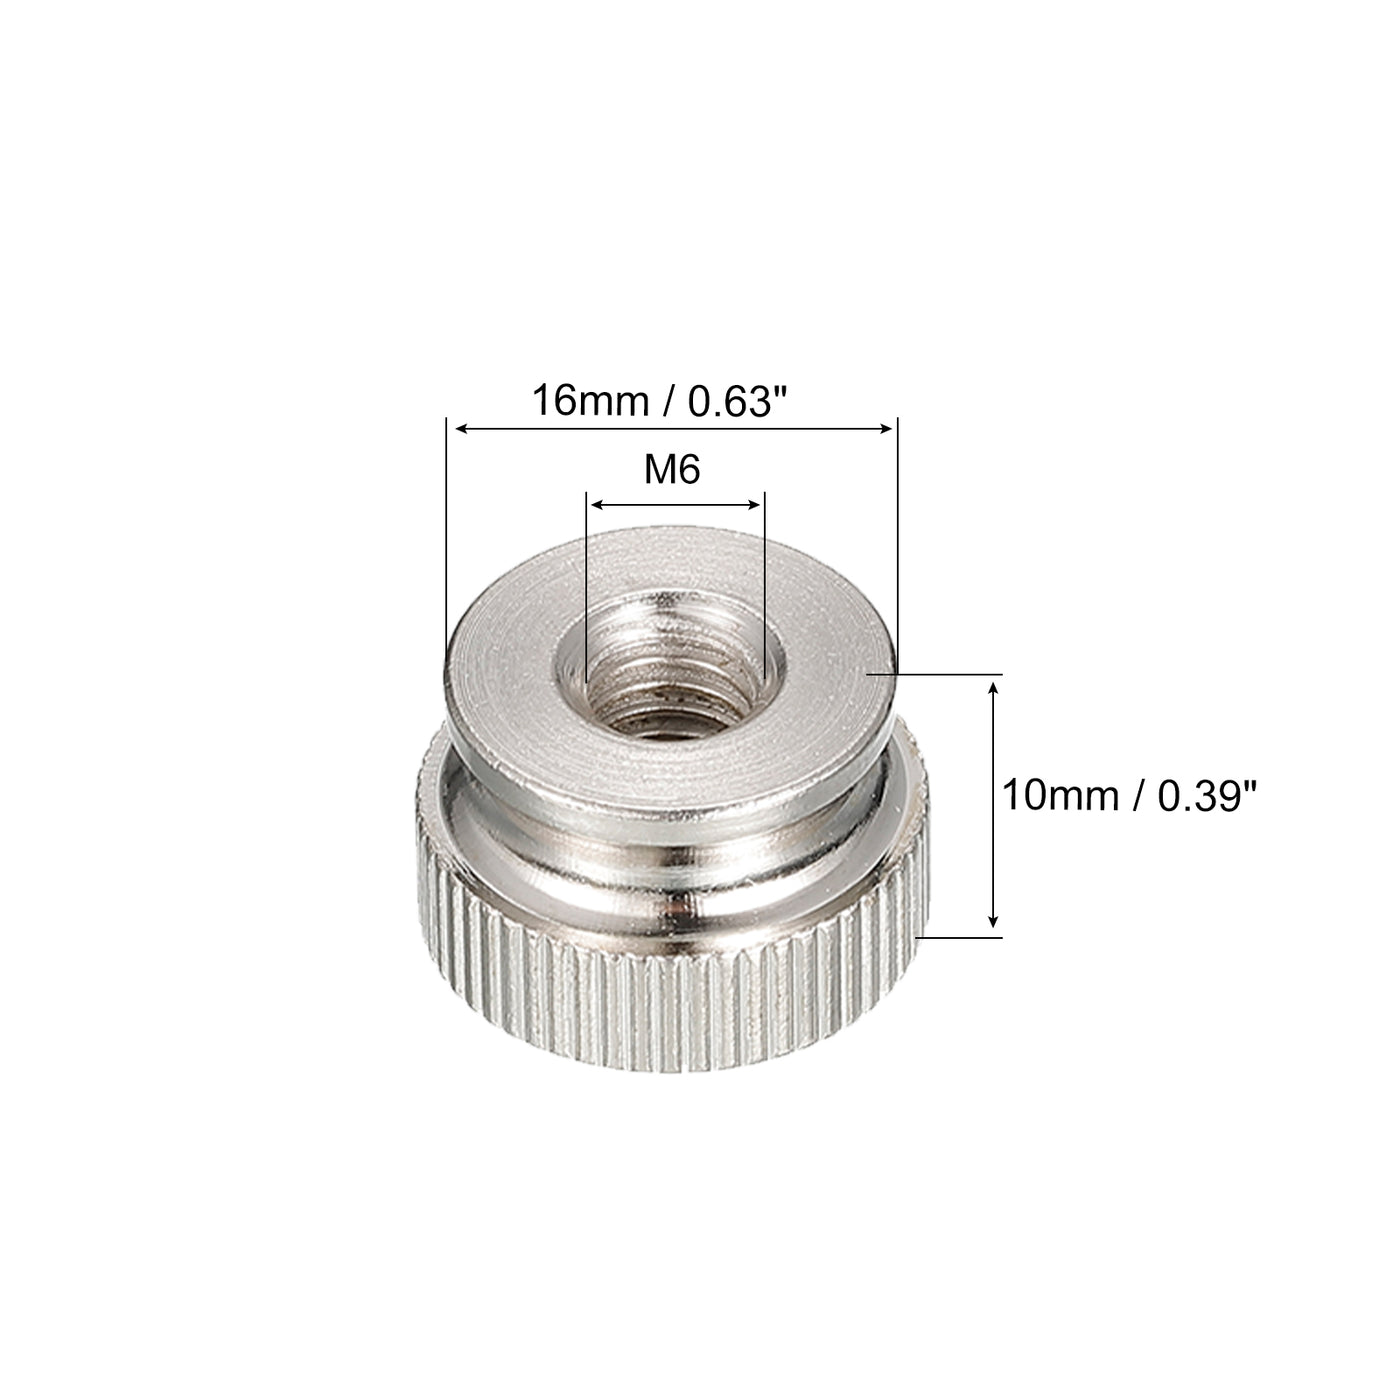 uxcell Uxcell Knurled Thumb Nuts,Carbon Steel Knurled Nut with Collar High Head Blind Hole Knurled Thumb Nuts for 3D Printer Parts